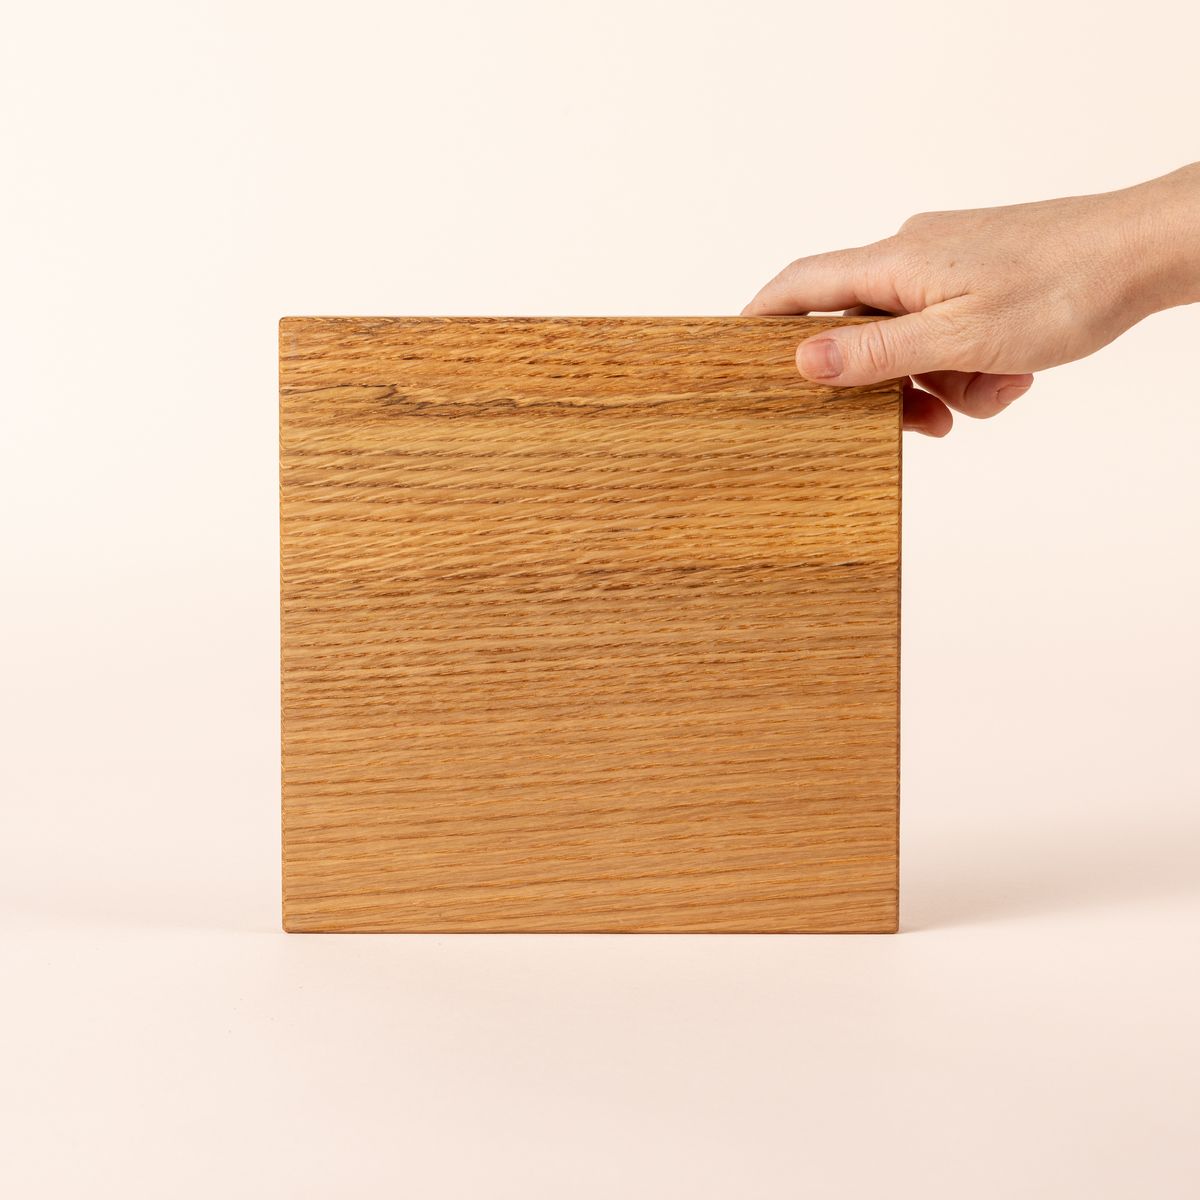 Hand holds up a thick rectangular cutting board made of light-colored wood